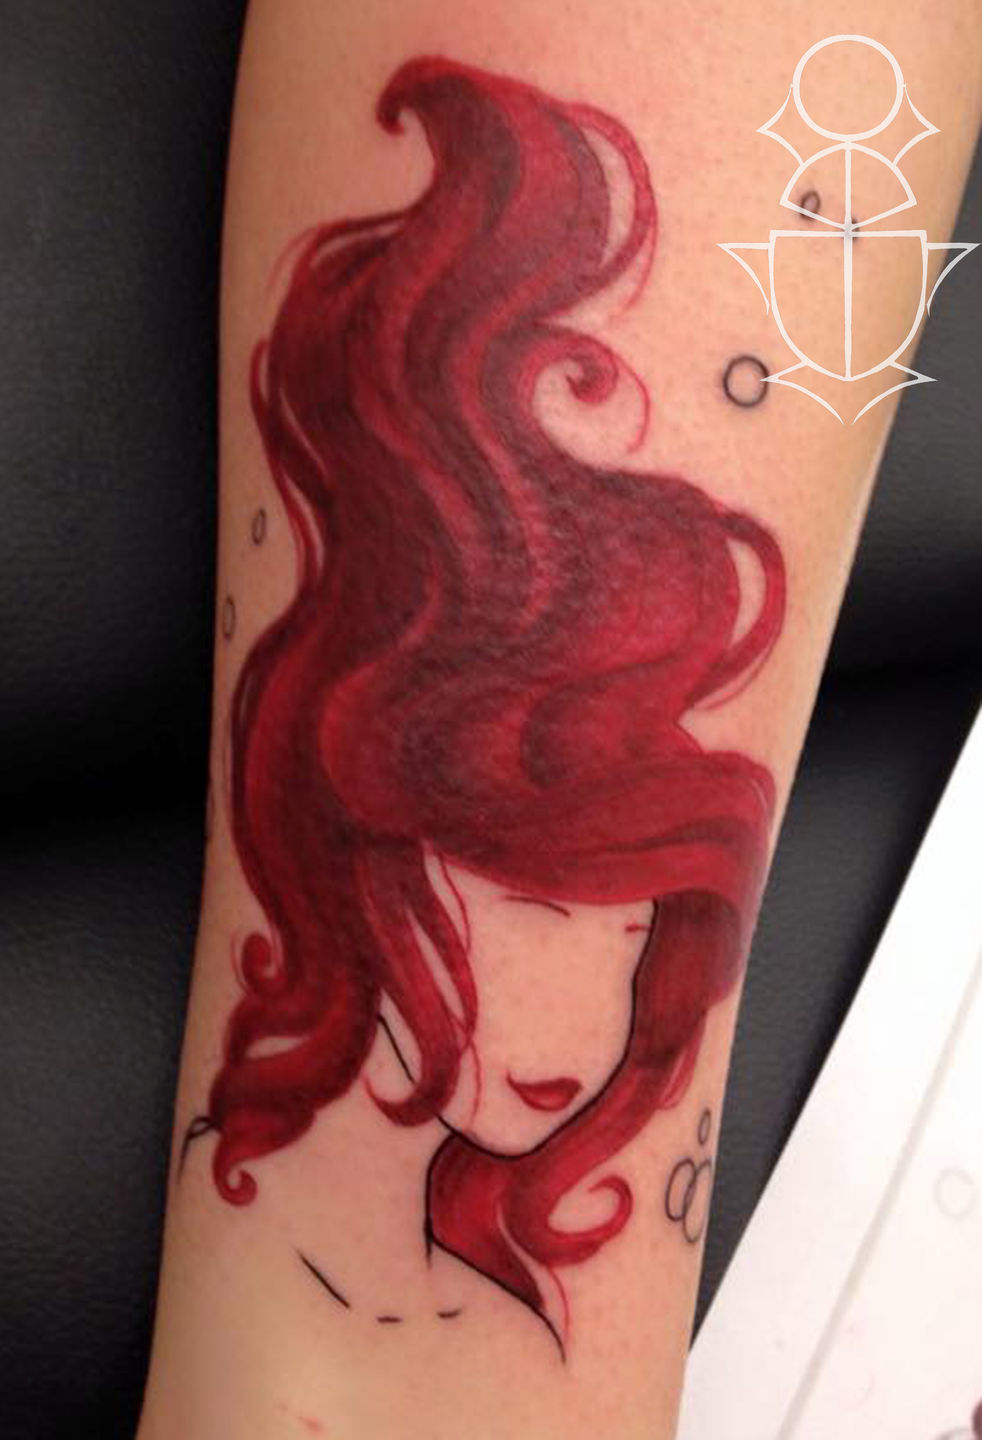 15 Simple and Traditional Mermaid Tattoo Designs